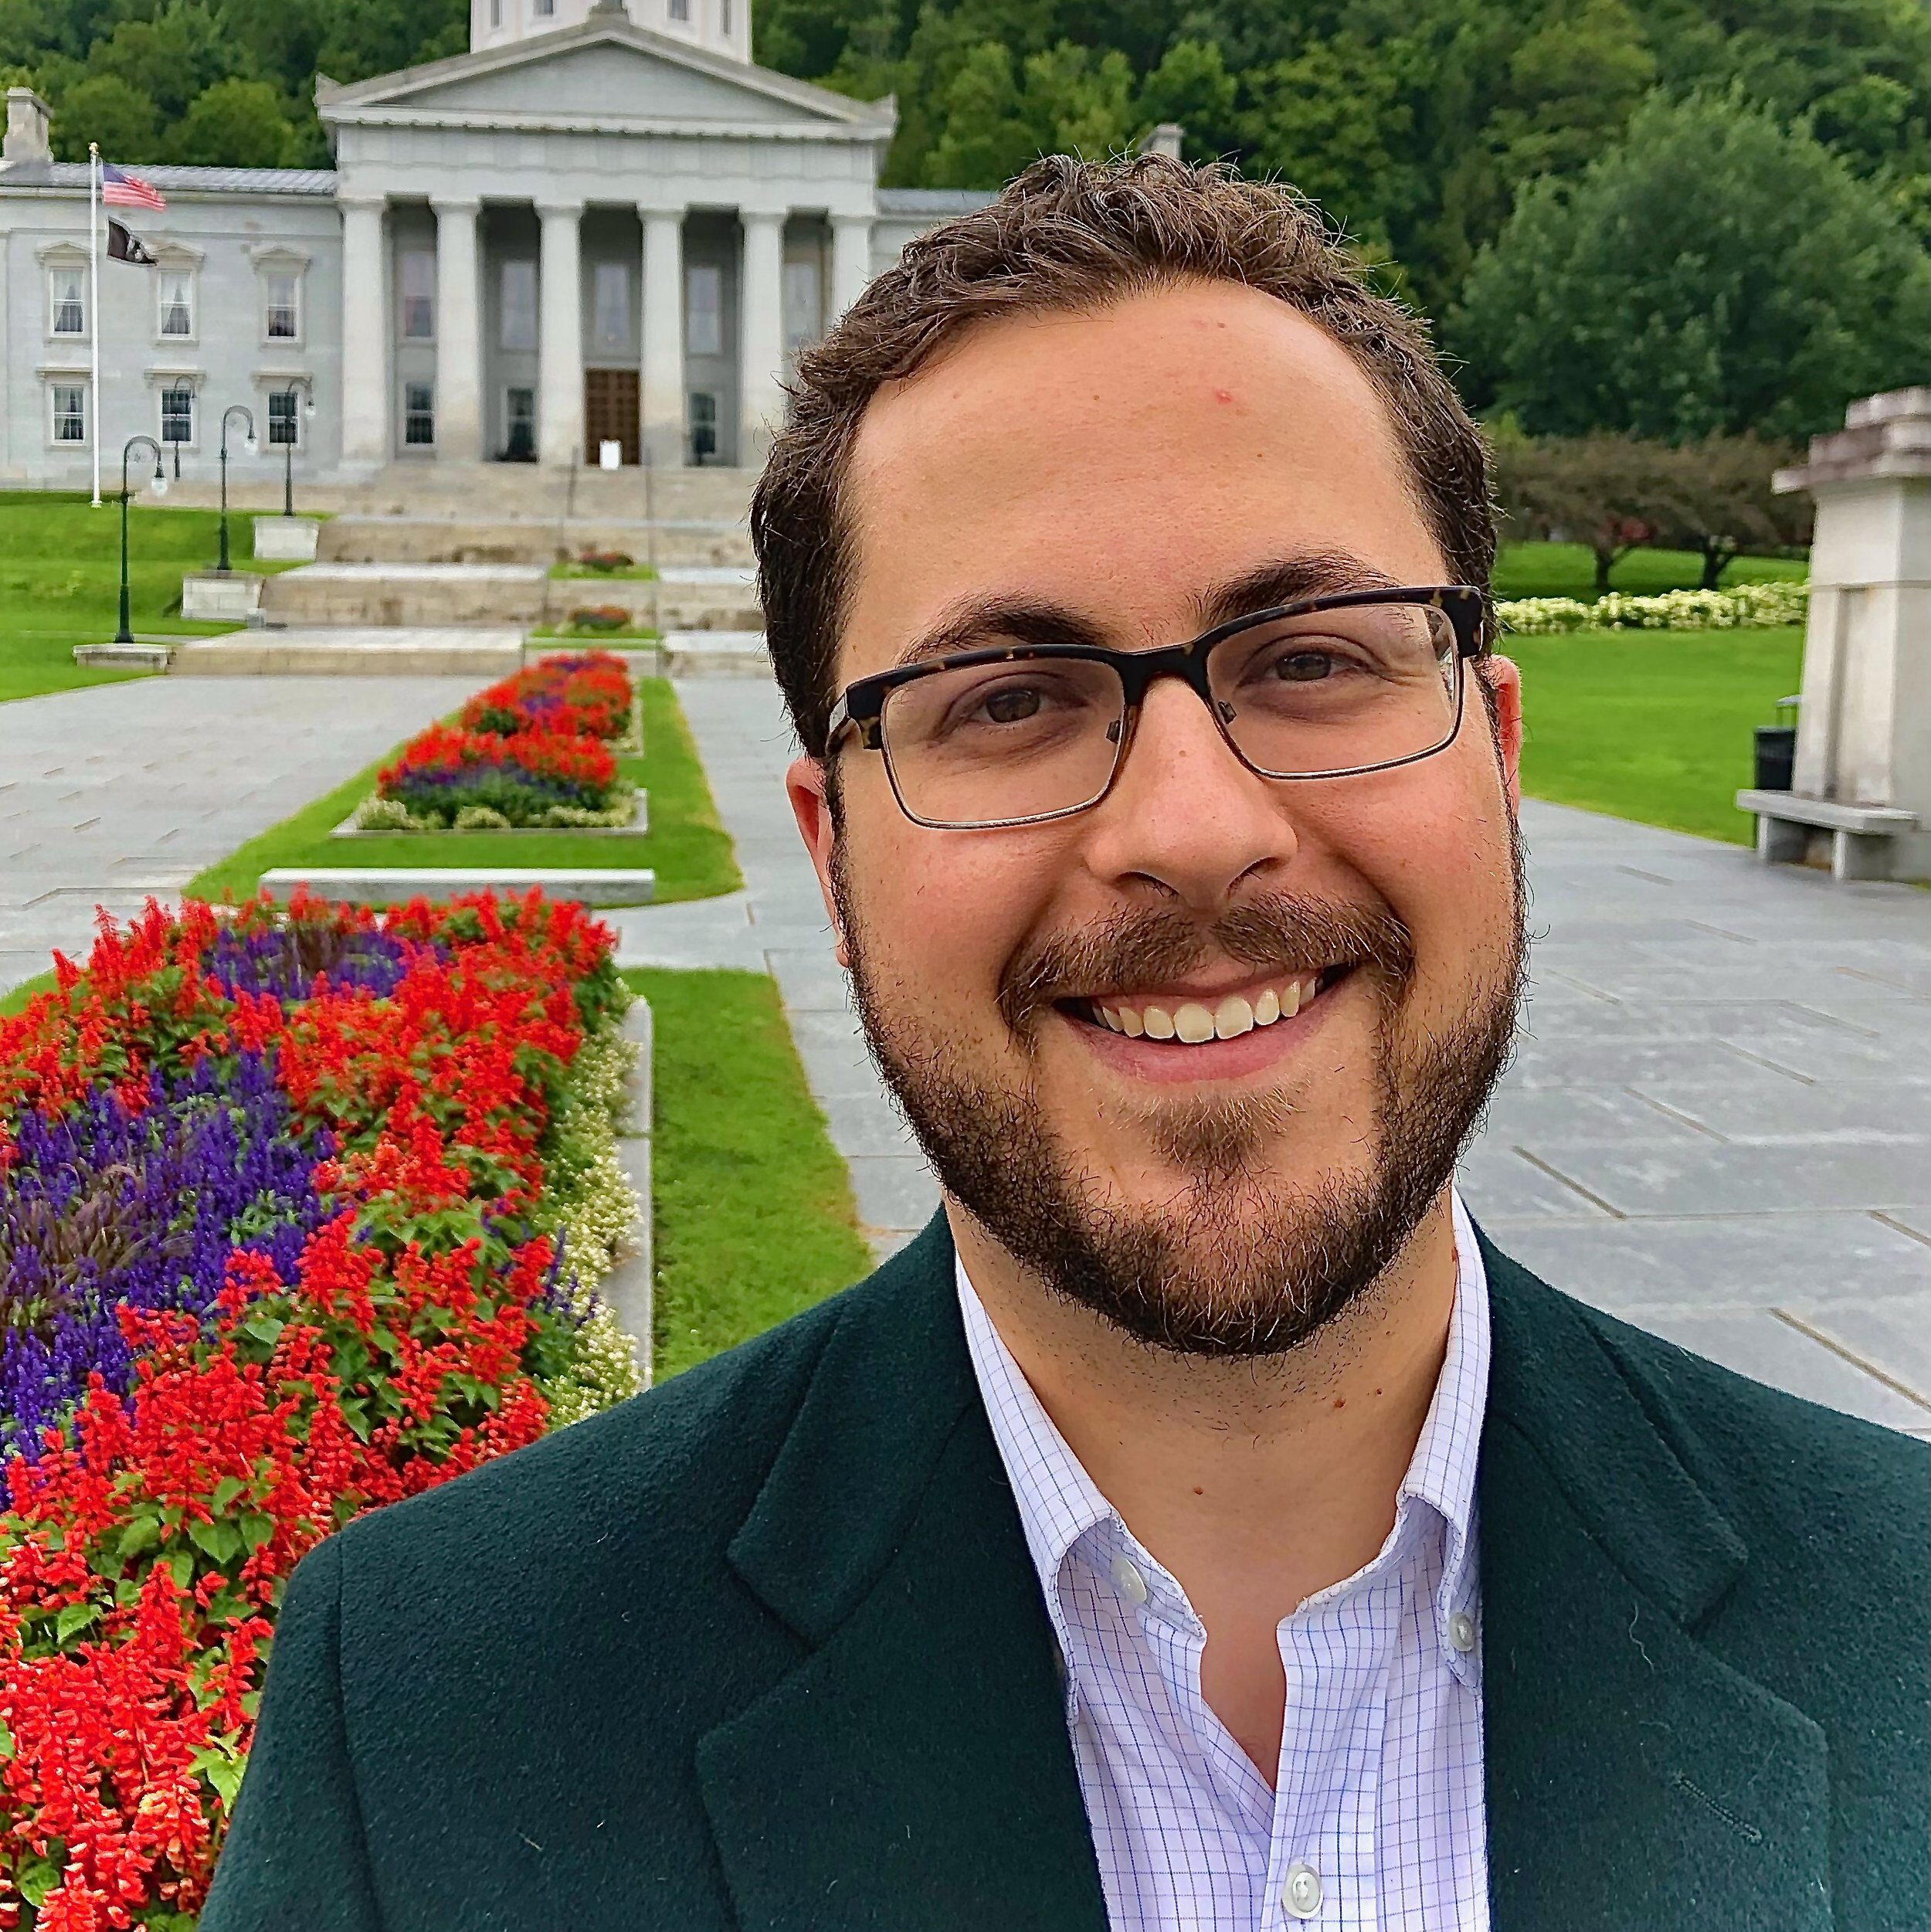 Photo of attorney Andrew Marchev. Light-skinned main with short, brown hair and a short, brown beard and mustache, He wears a dark green suit jacket and pale button up shirt. He is smiling at the camera and standing in front of landscaped flowers and a government building.